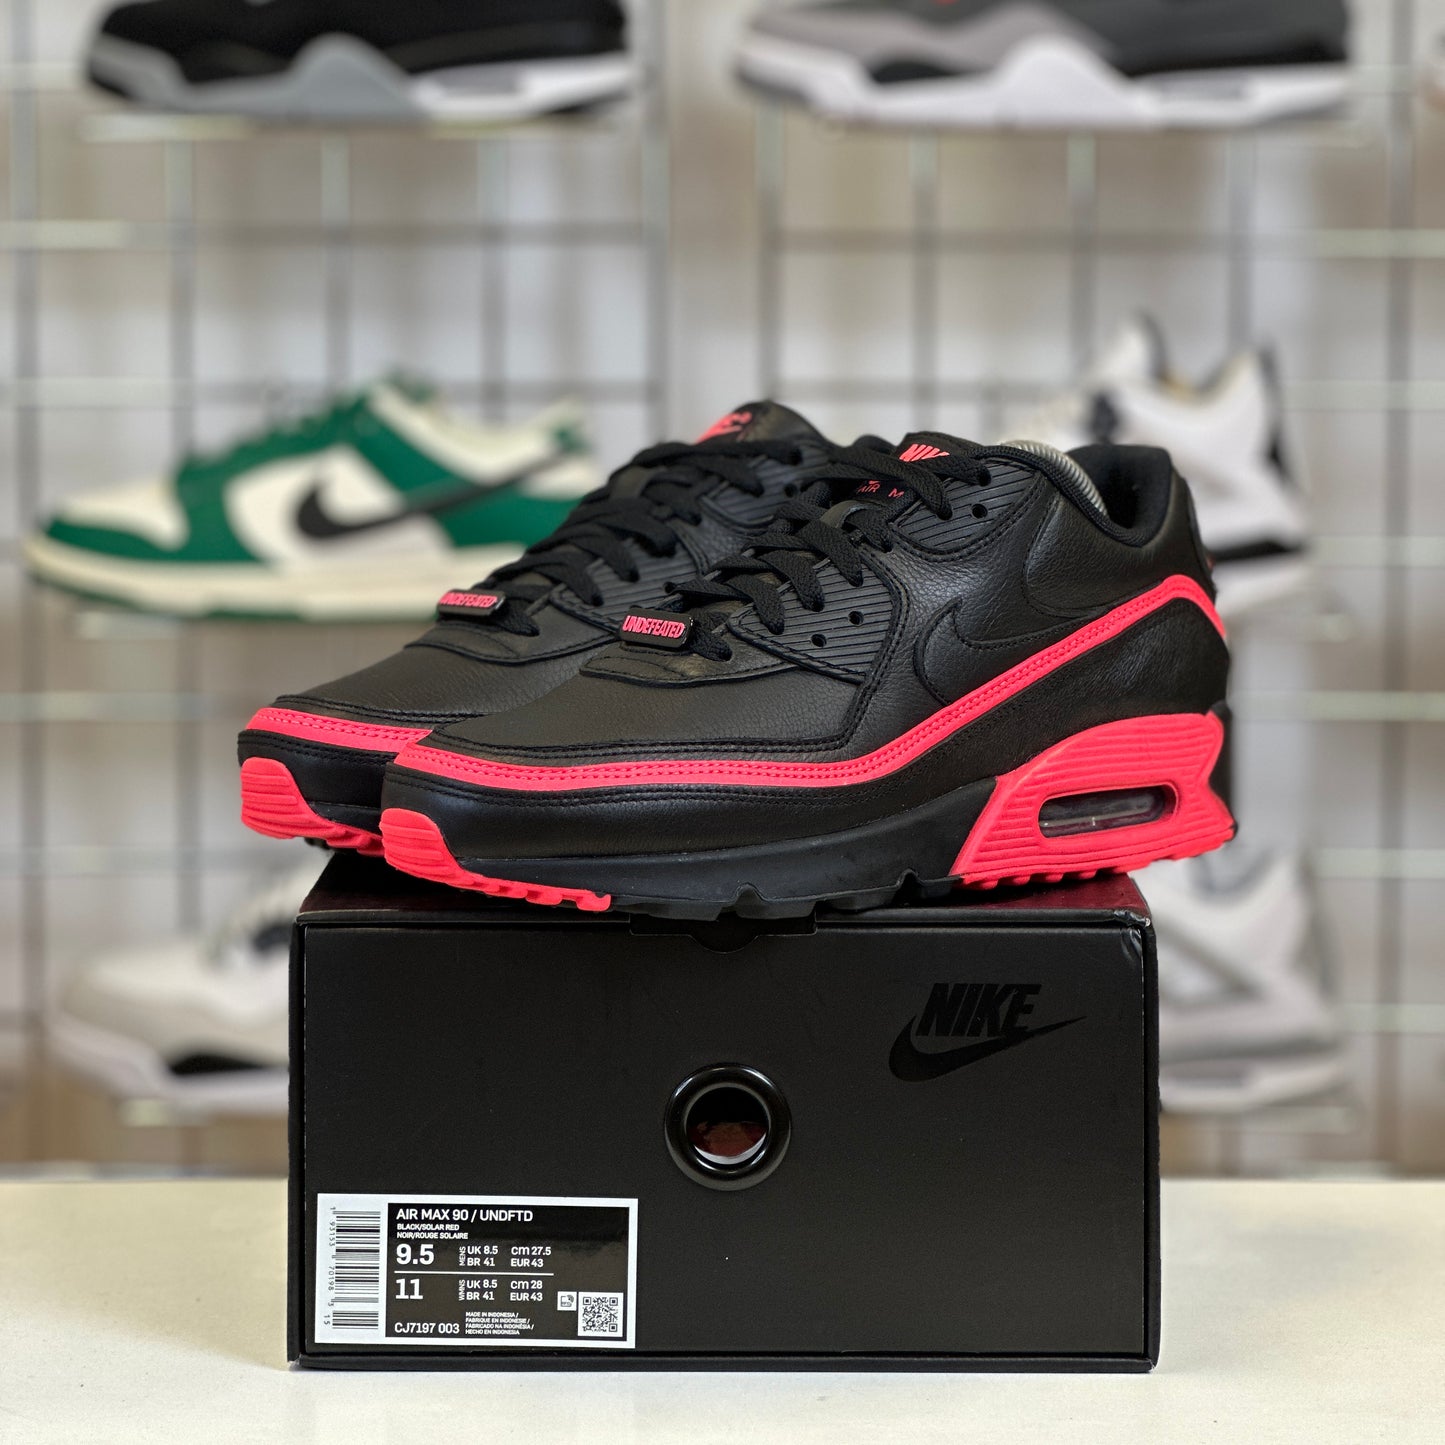 Nike Air Max 90 Undefeated 'Black Solar Red' UK8.5